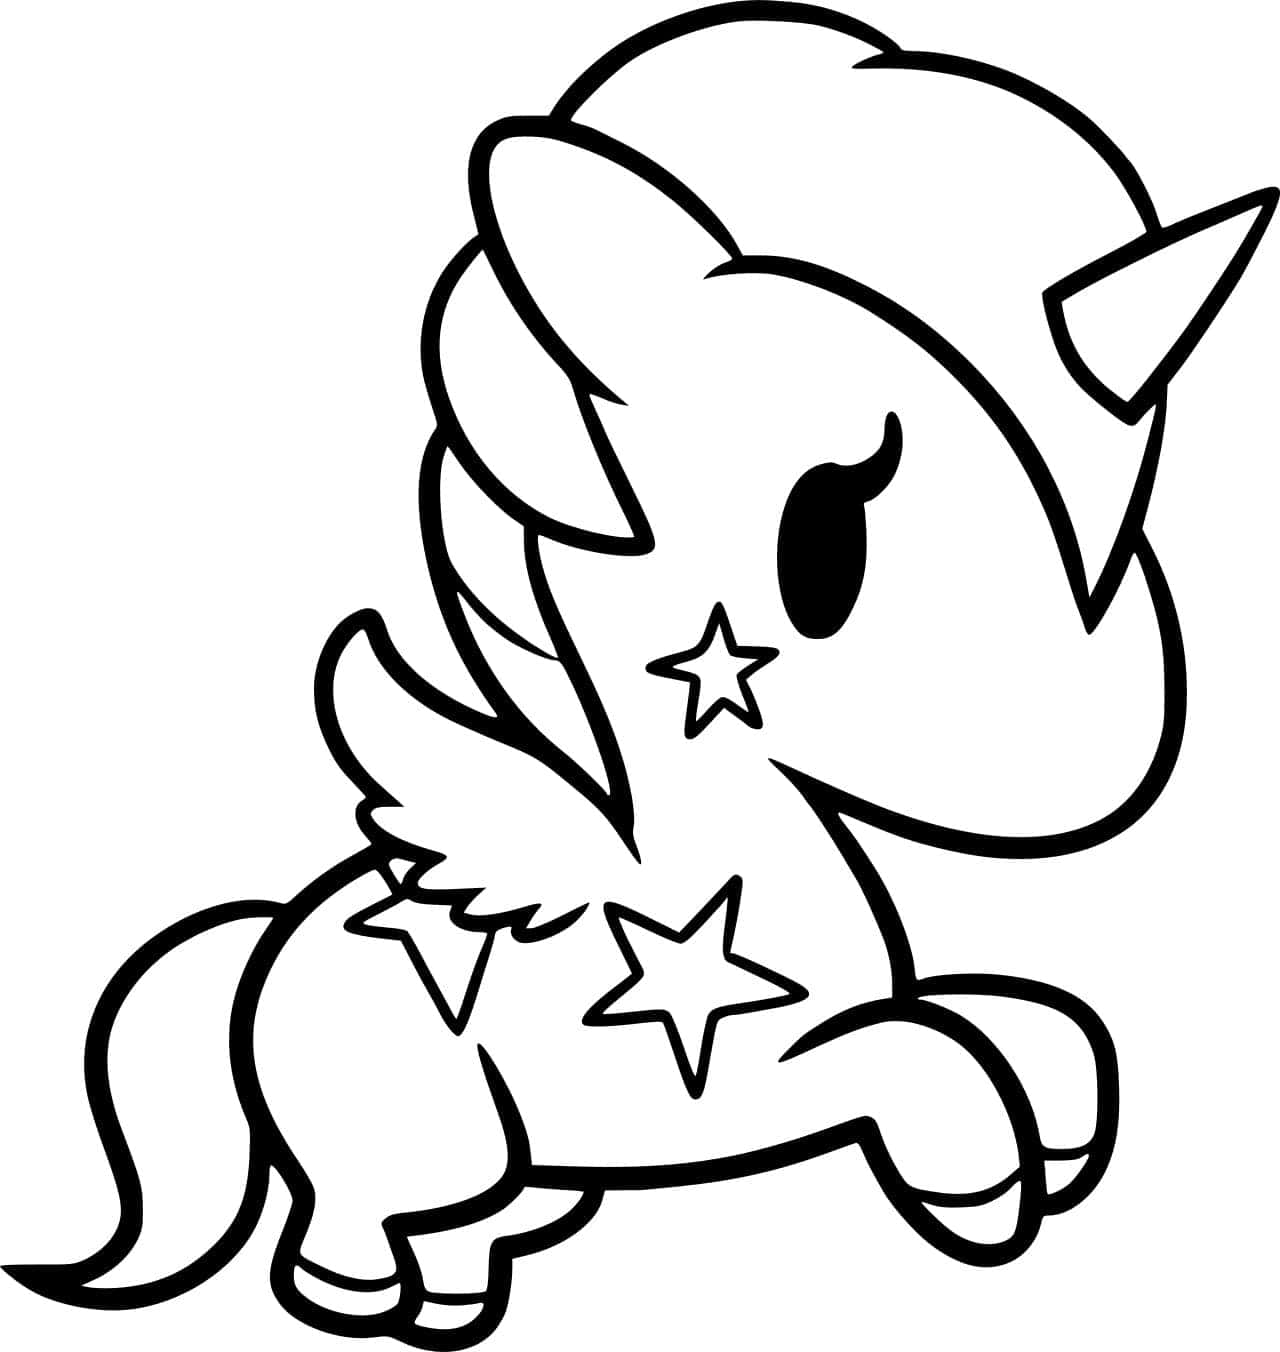 How to Draw a Unicorn: Easy Step-by-Step Video Tutorial